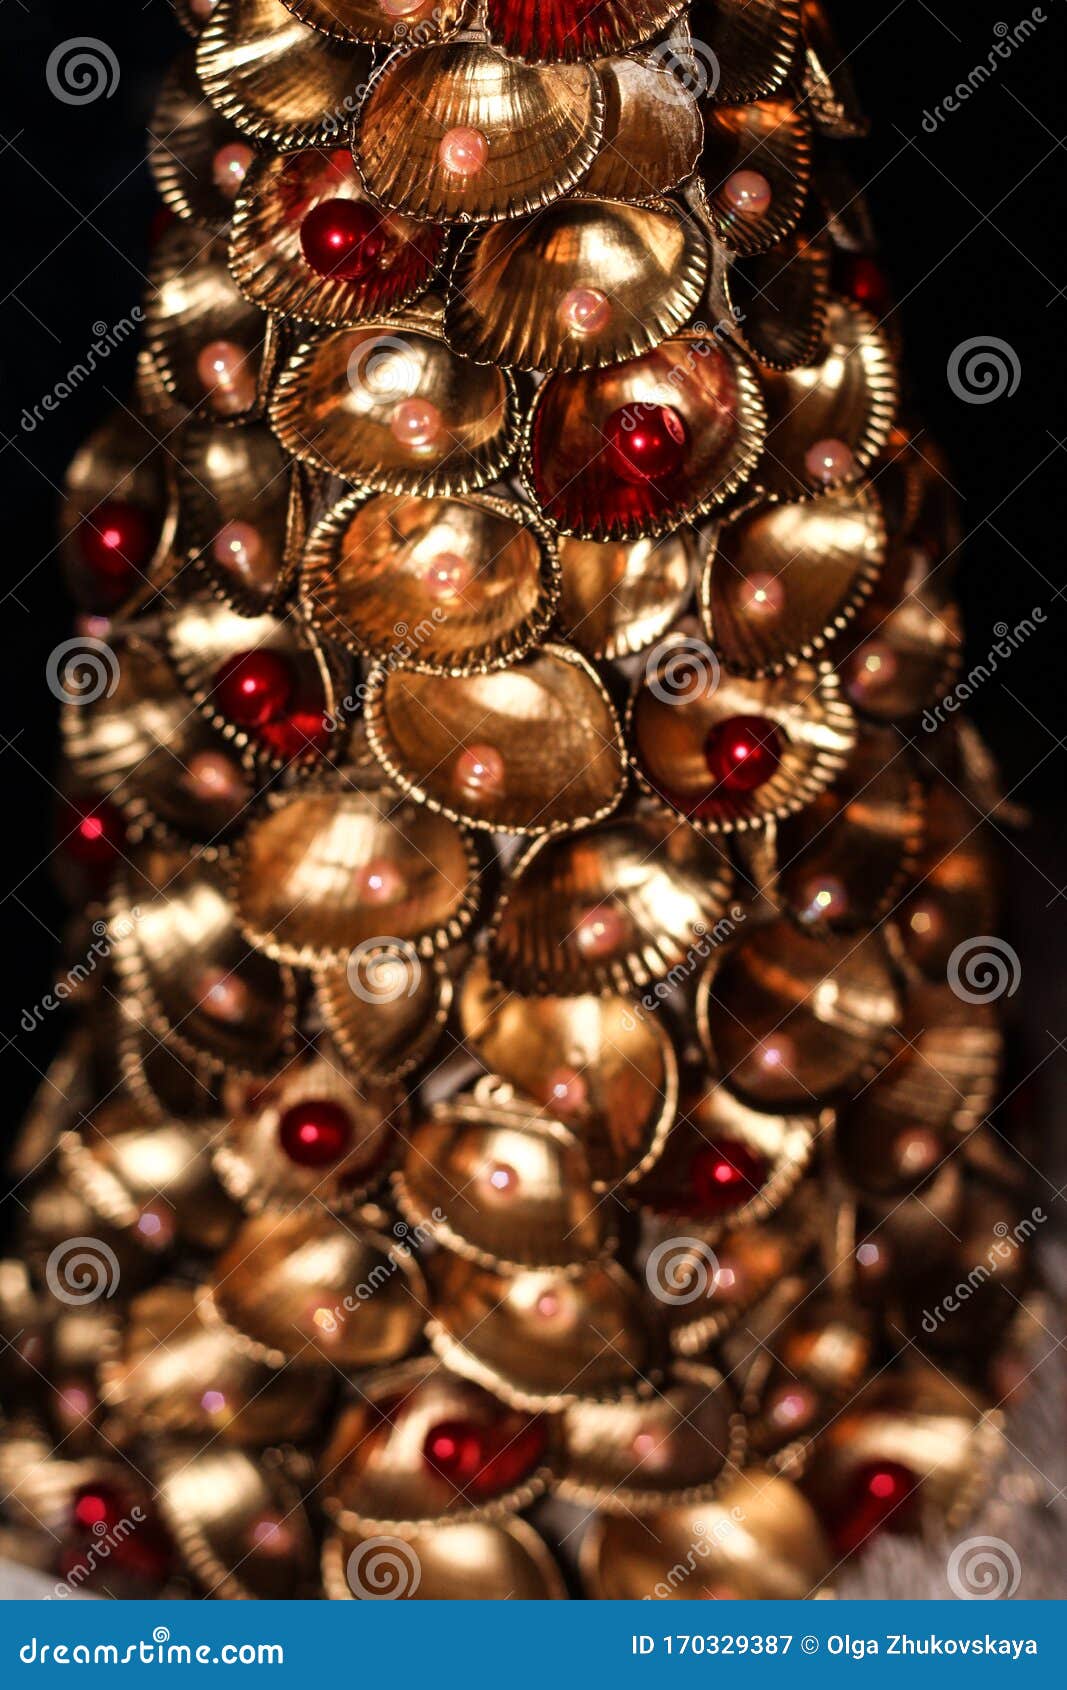 Handmade Golden Christmas Tree with Beads Made from Sea Shells